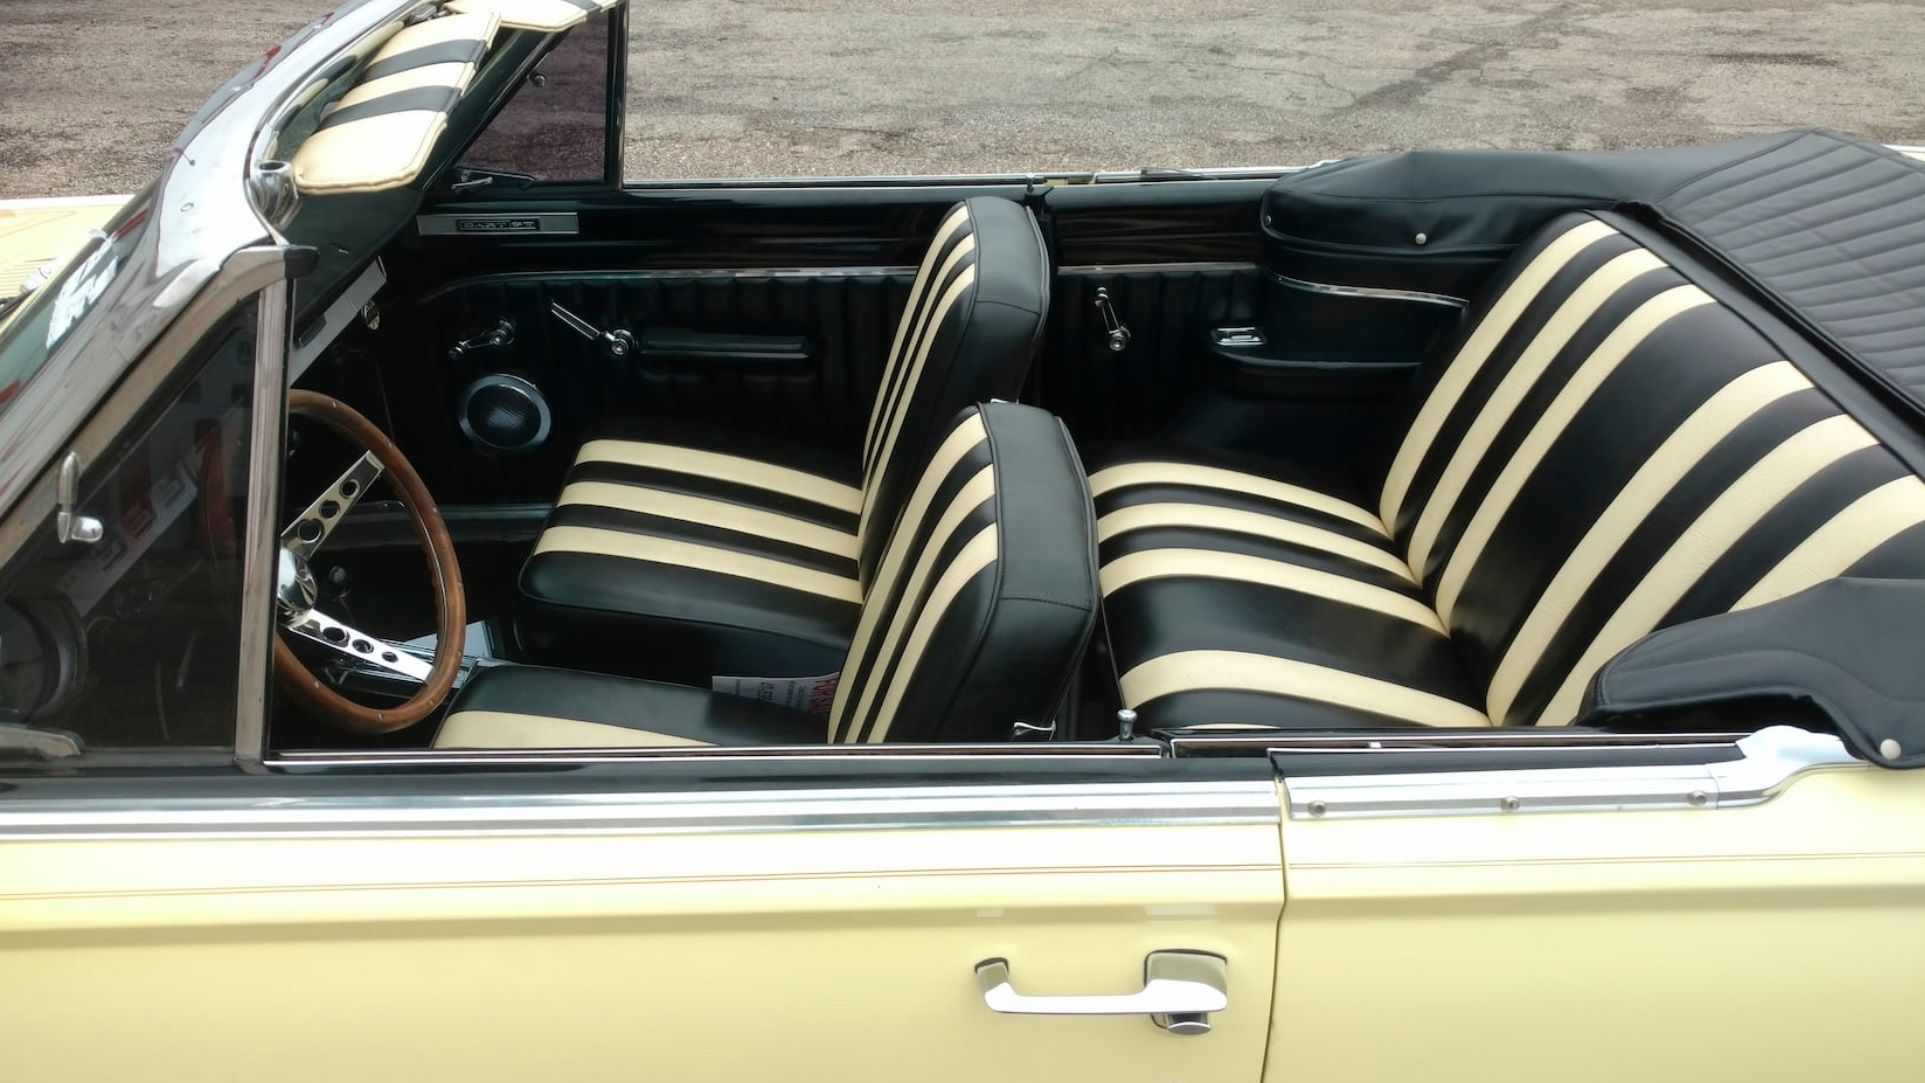 The interior of the 1965 Dodge Dart Charger 273.